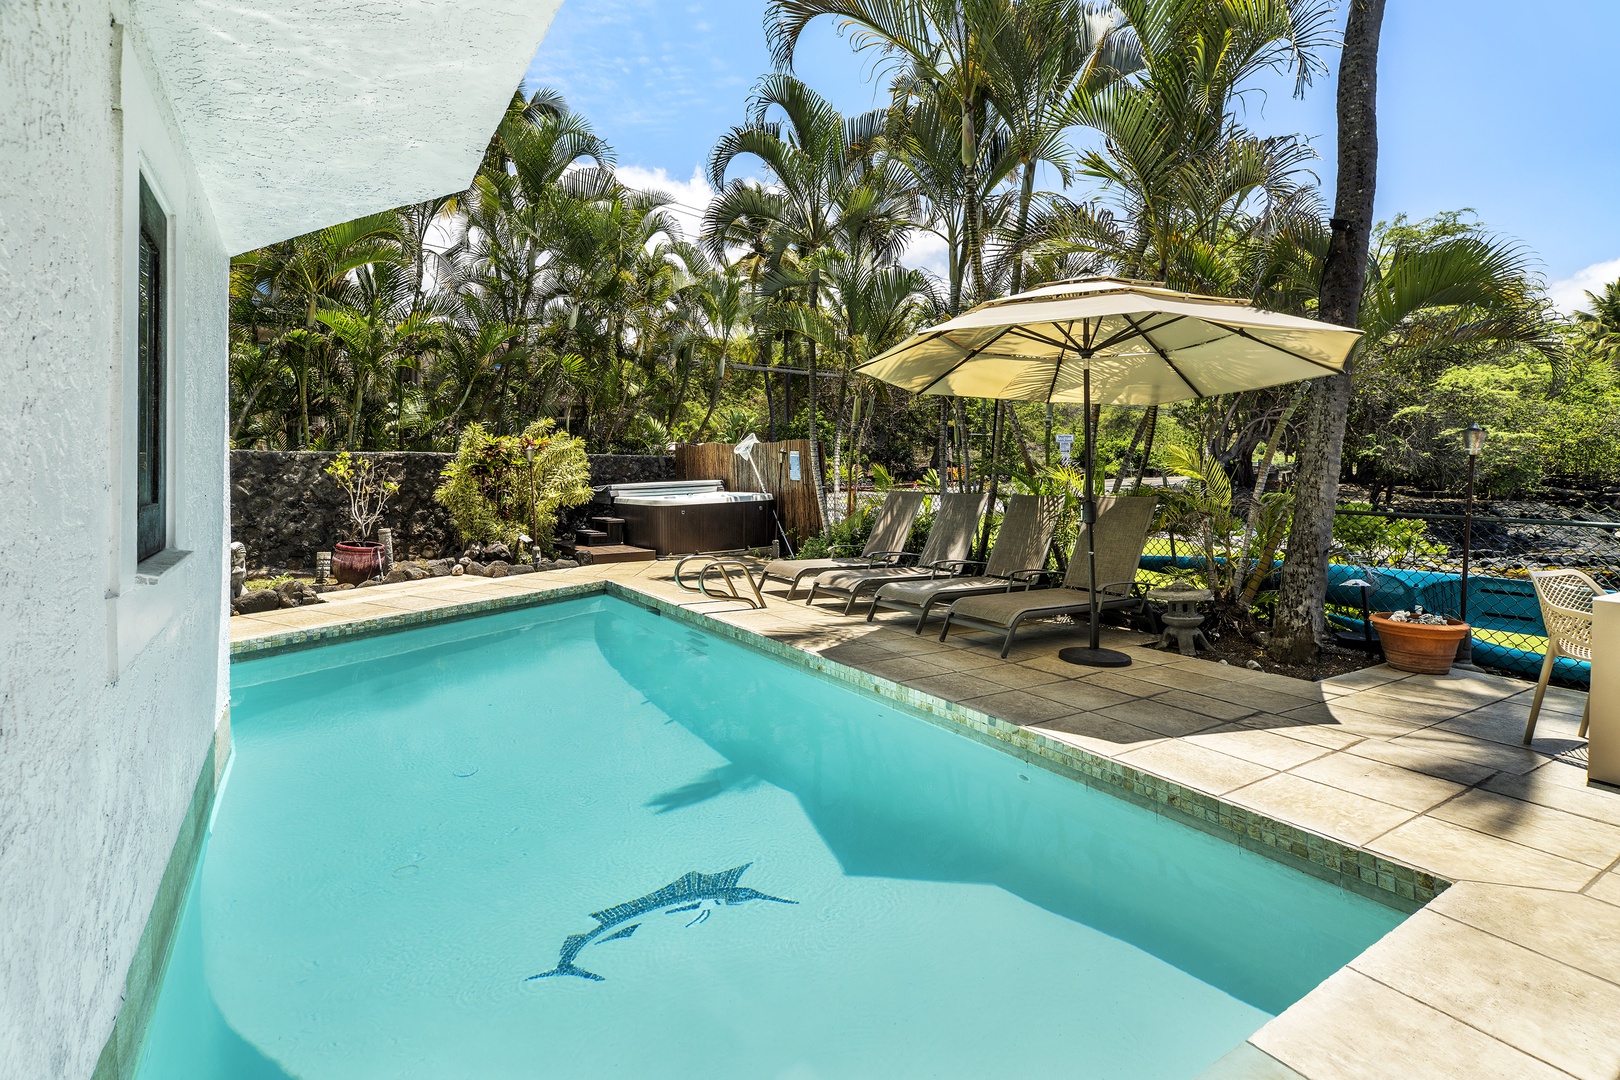 Kailua Kona Vacation Rentals, Kona's Shangri La - Soak in the solar-heated pool, relax in the hot tub, or read a book on one of the lounge chairs as palm trees sway nearby.